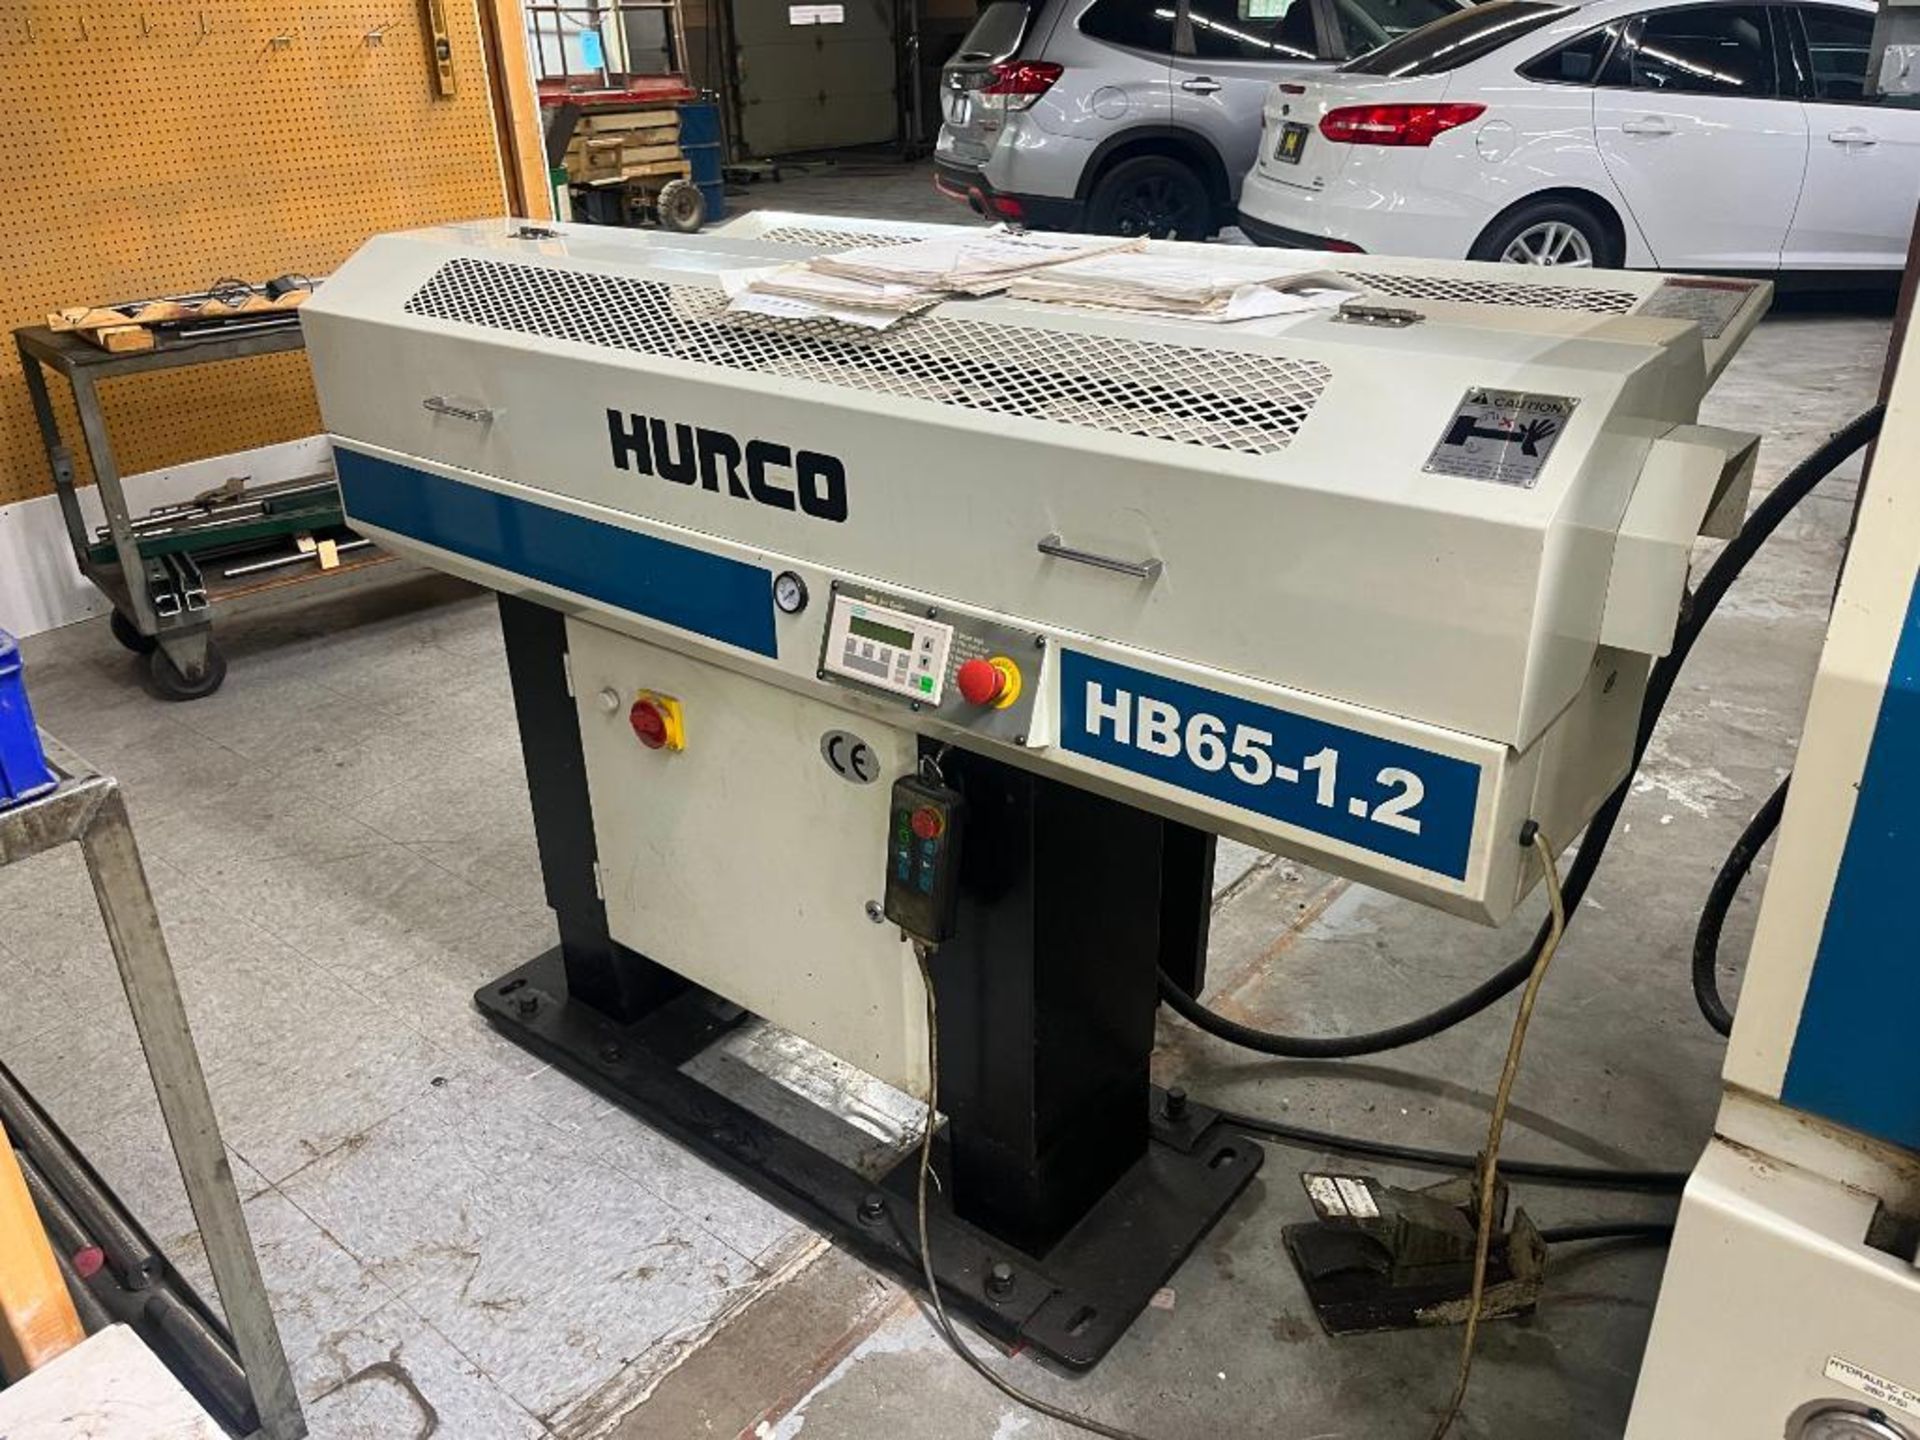 Hurco CNC Turning Center Model TM8, S/N TM8-01003015AAA with Hurco CNC Control. 8", 10-Position Vert - Image 27 of 47